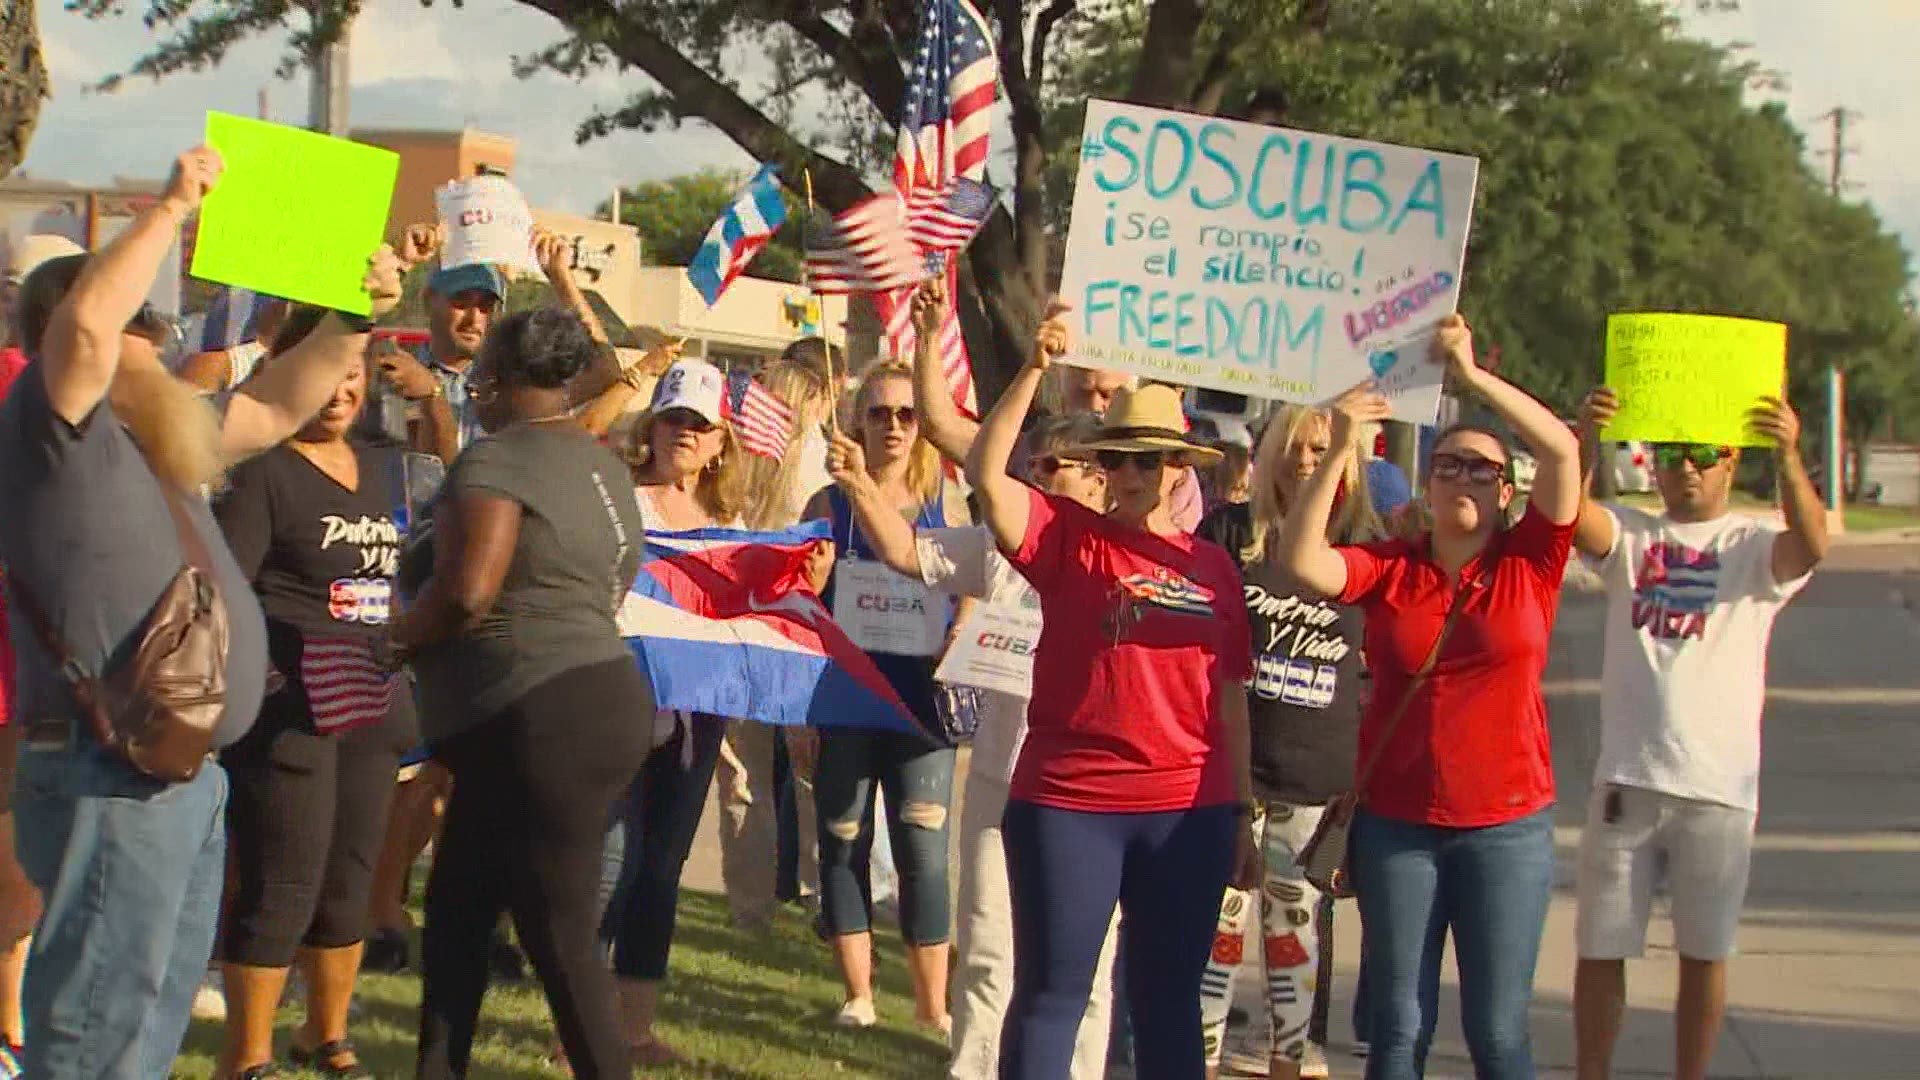 Many at the protest said there hasn't been a movement in Cuba like this since the Cuban Revolution in 1959.